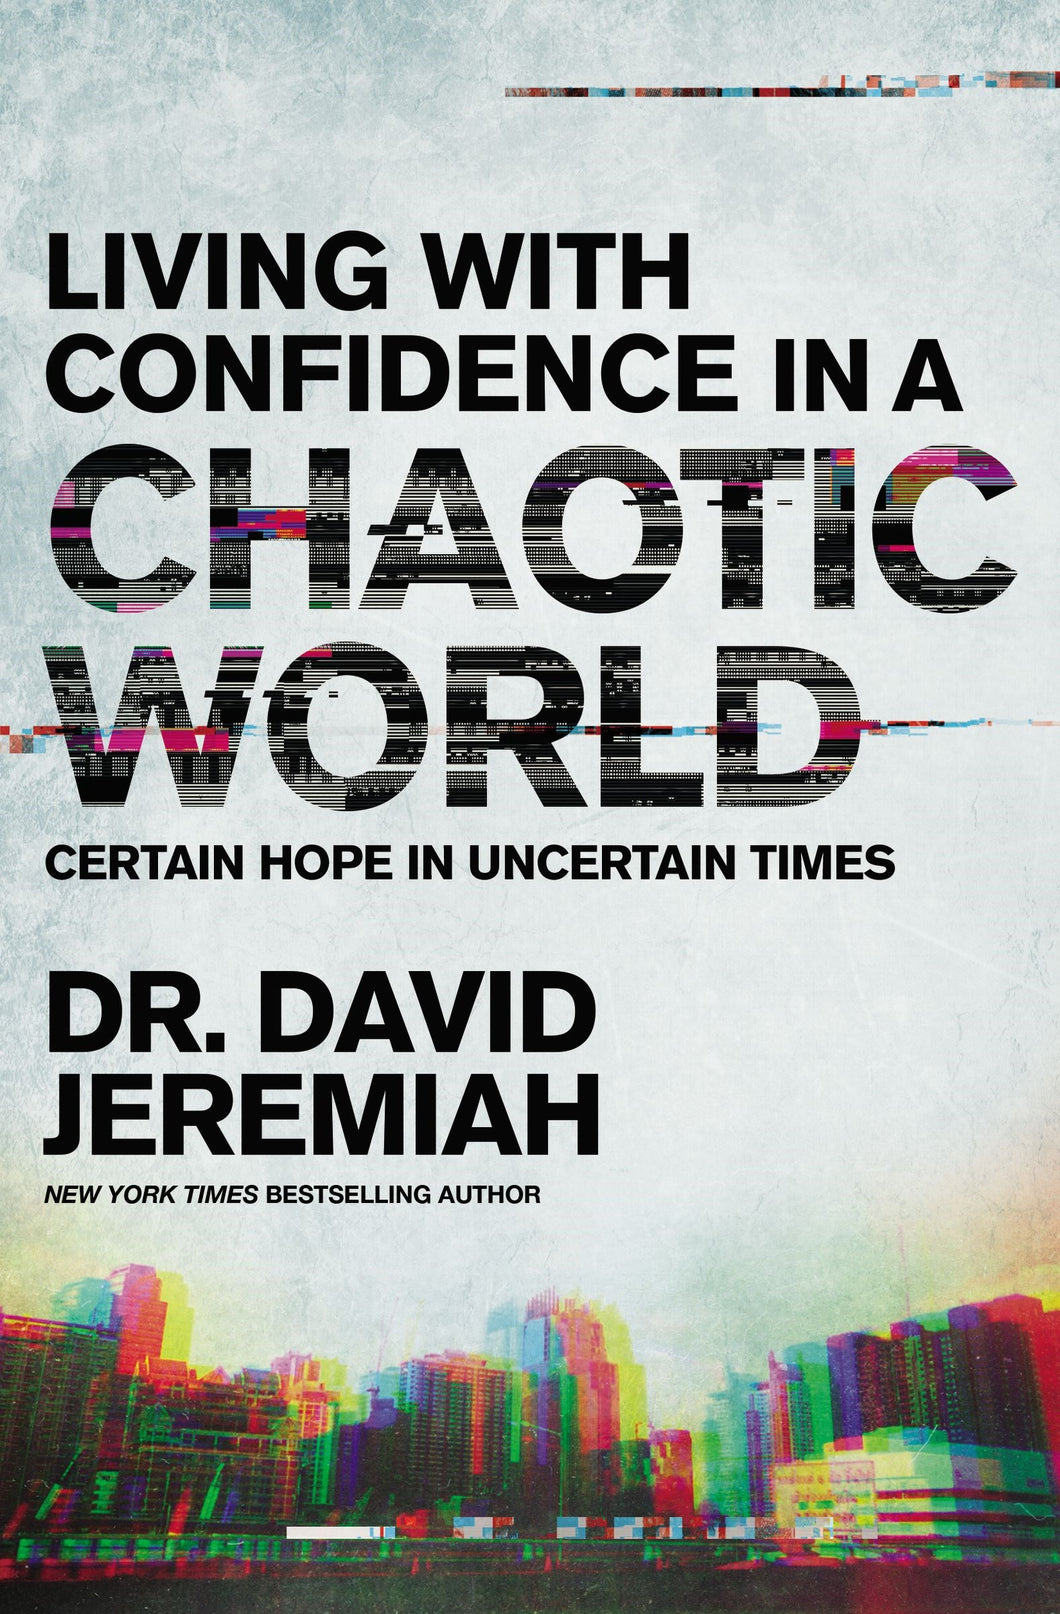 Living With Confidence In A Chaotic World